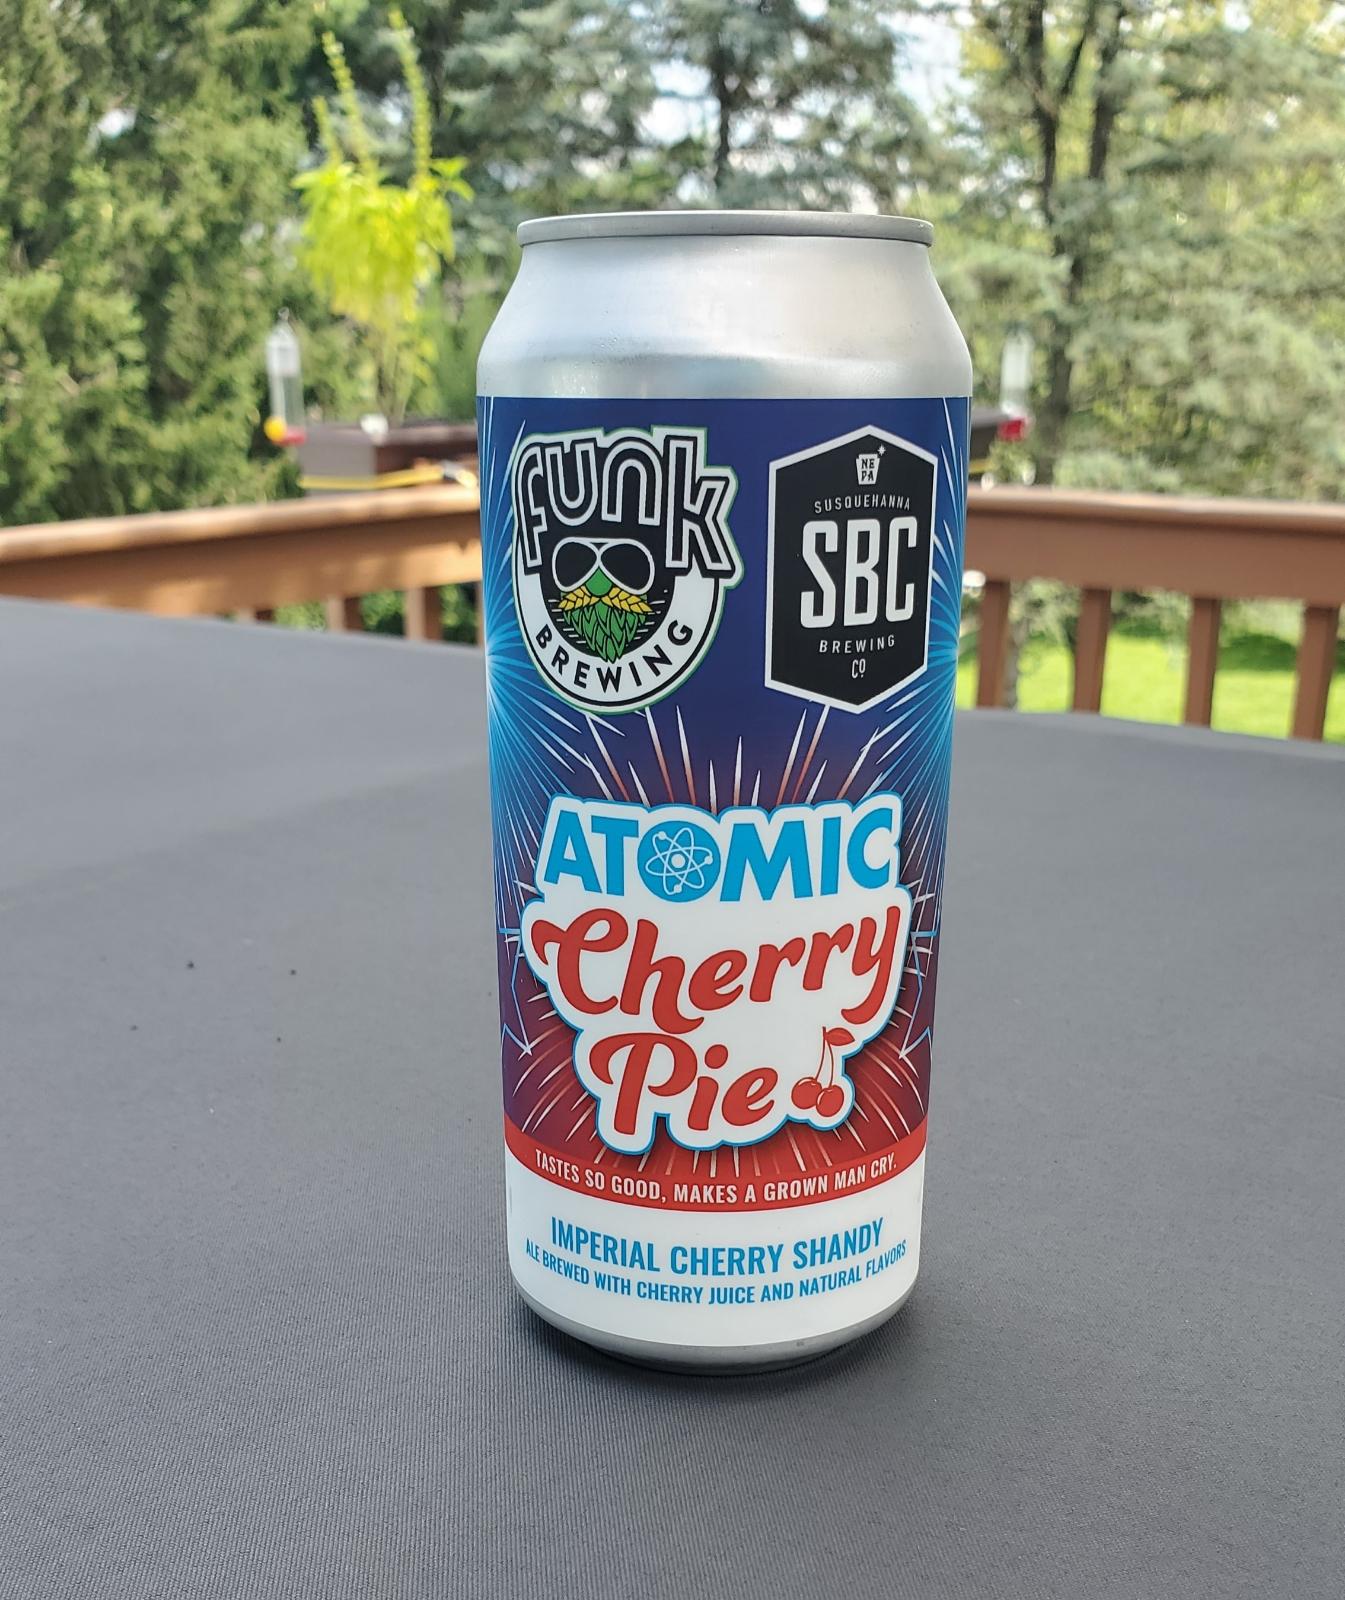 Atomic Cherry Pie (Collaboration with Funk Brewing Company)